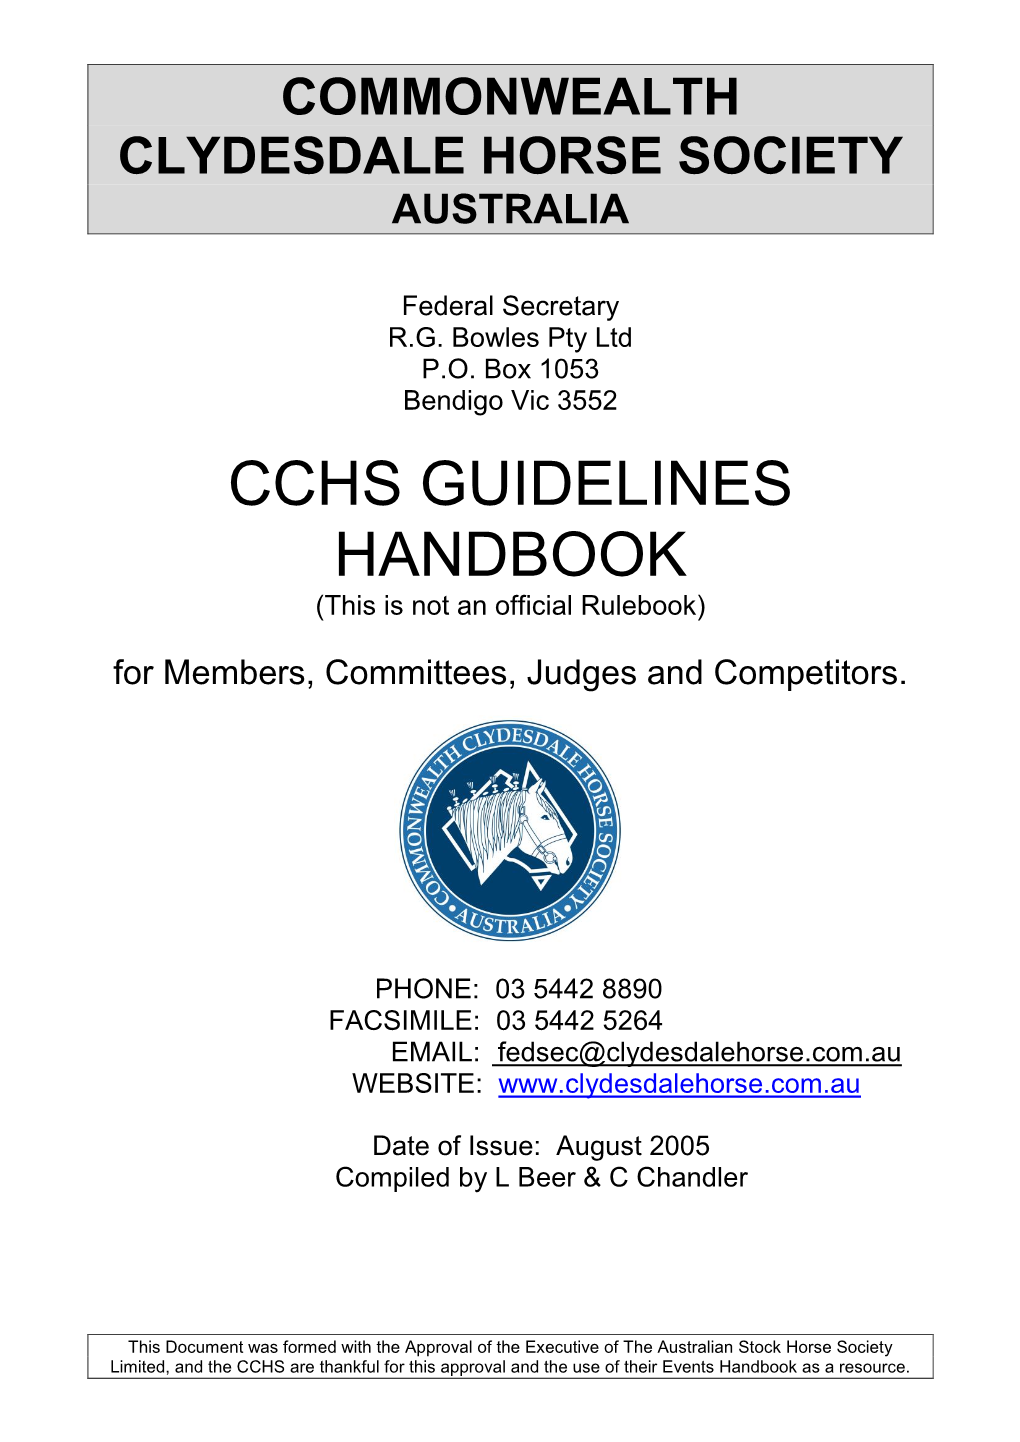 CCHS GUIDELINES HANDBOOK (This Is Not an Official Rulebook) for Members, Committees, Judges and Competitors